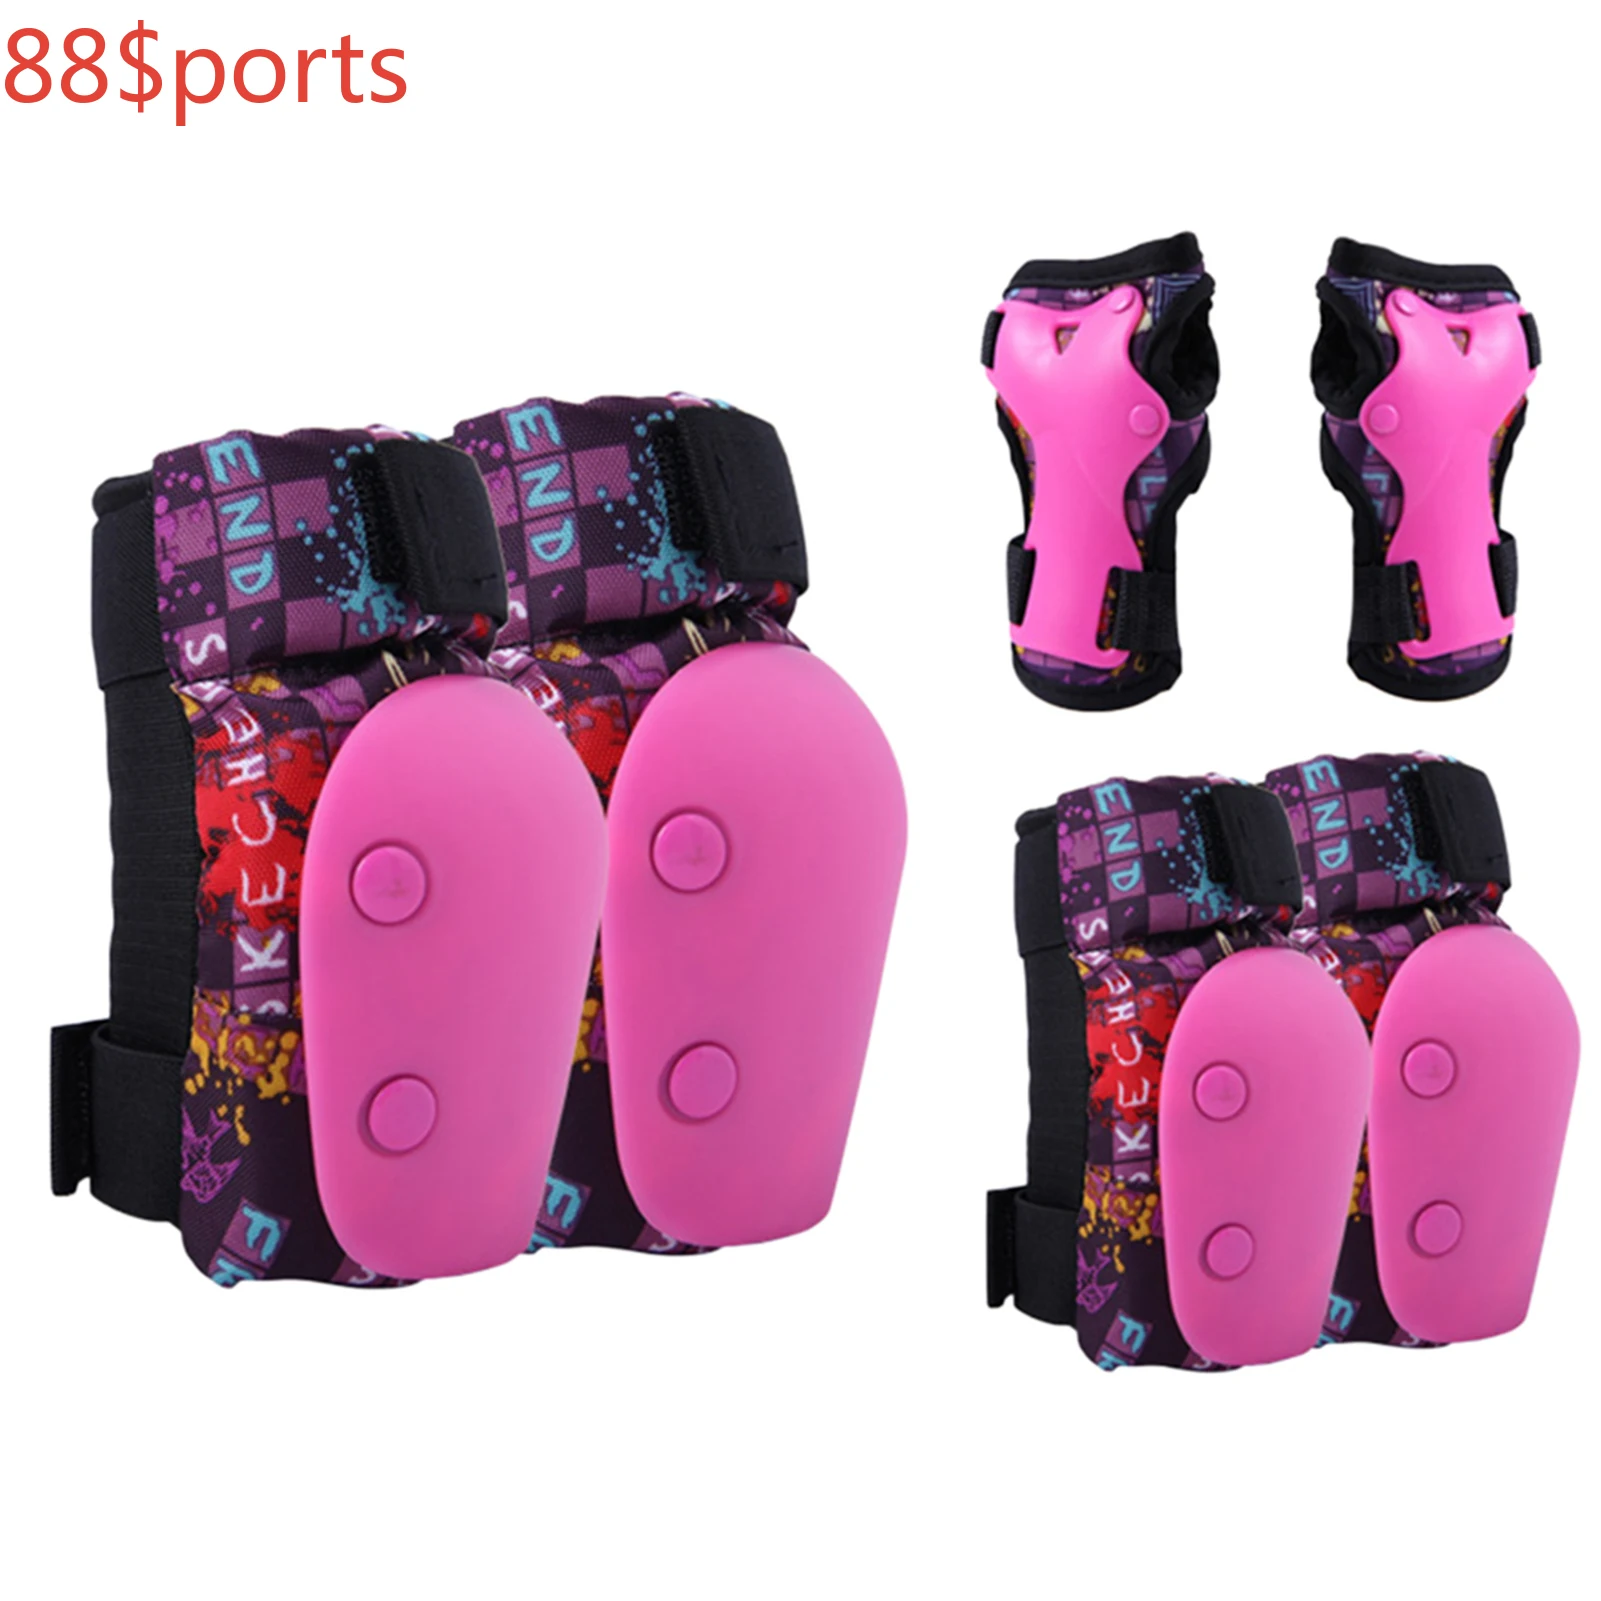 

6pcs Protective Gear Set Scootering Rollerblading Wrist Guards Skateboarding For Kids Accessories Gift Sports Elbow Knee Pads